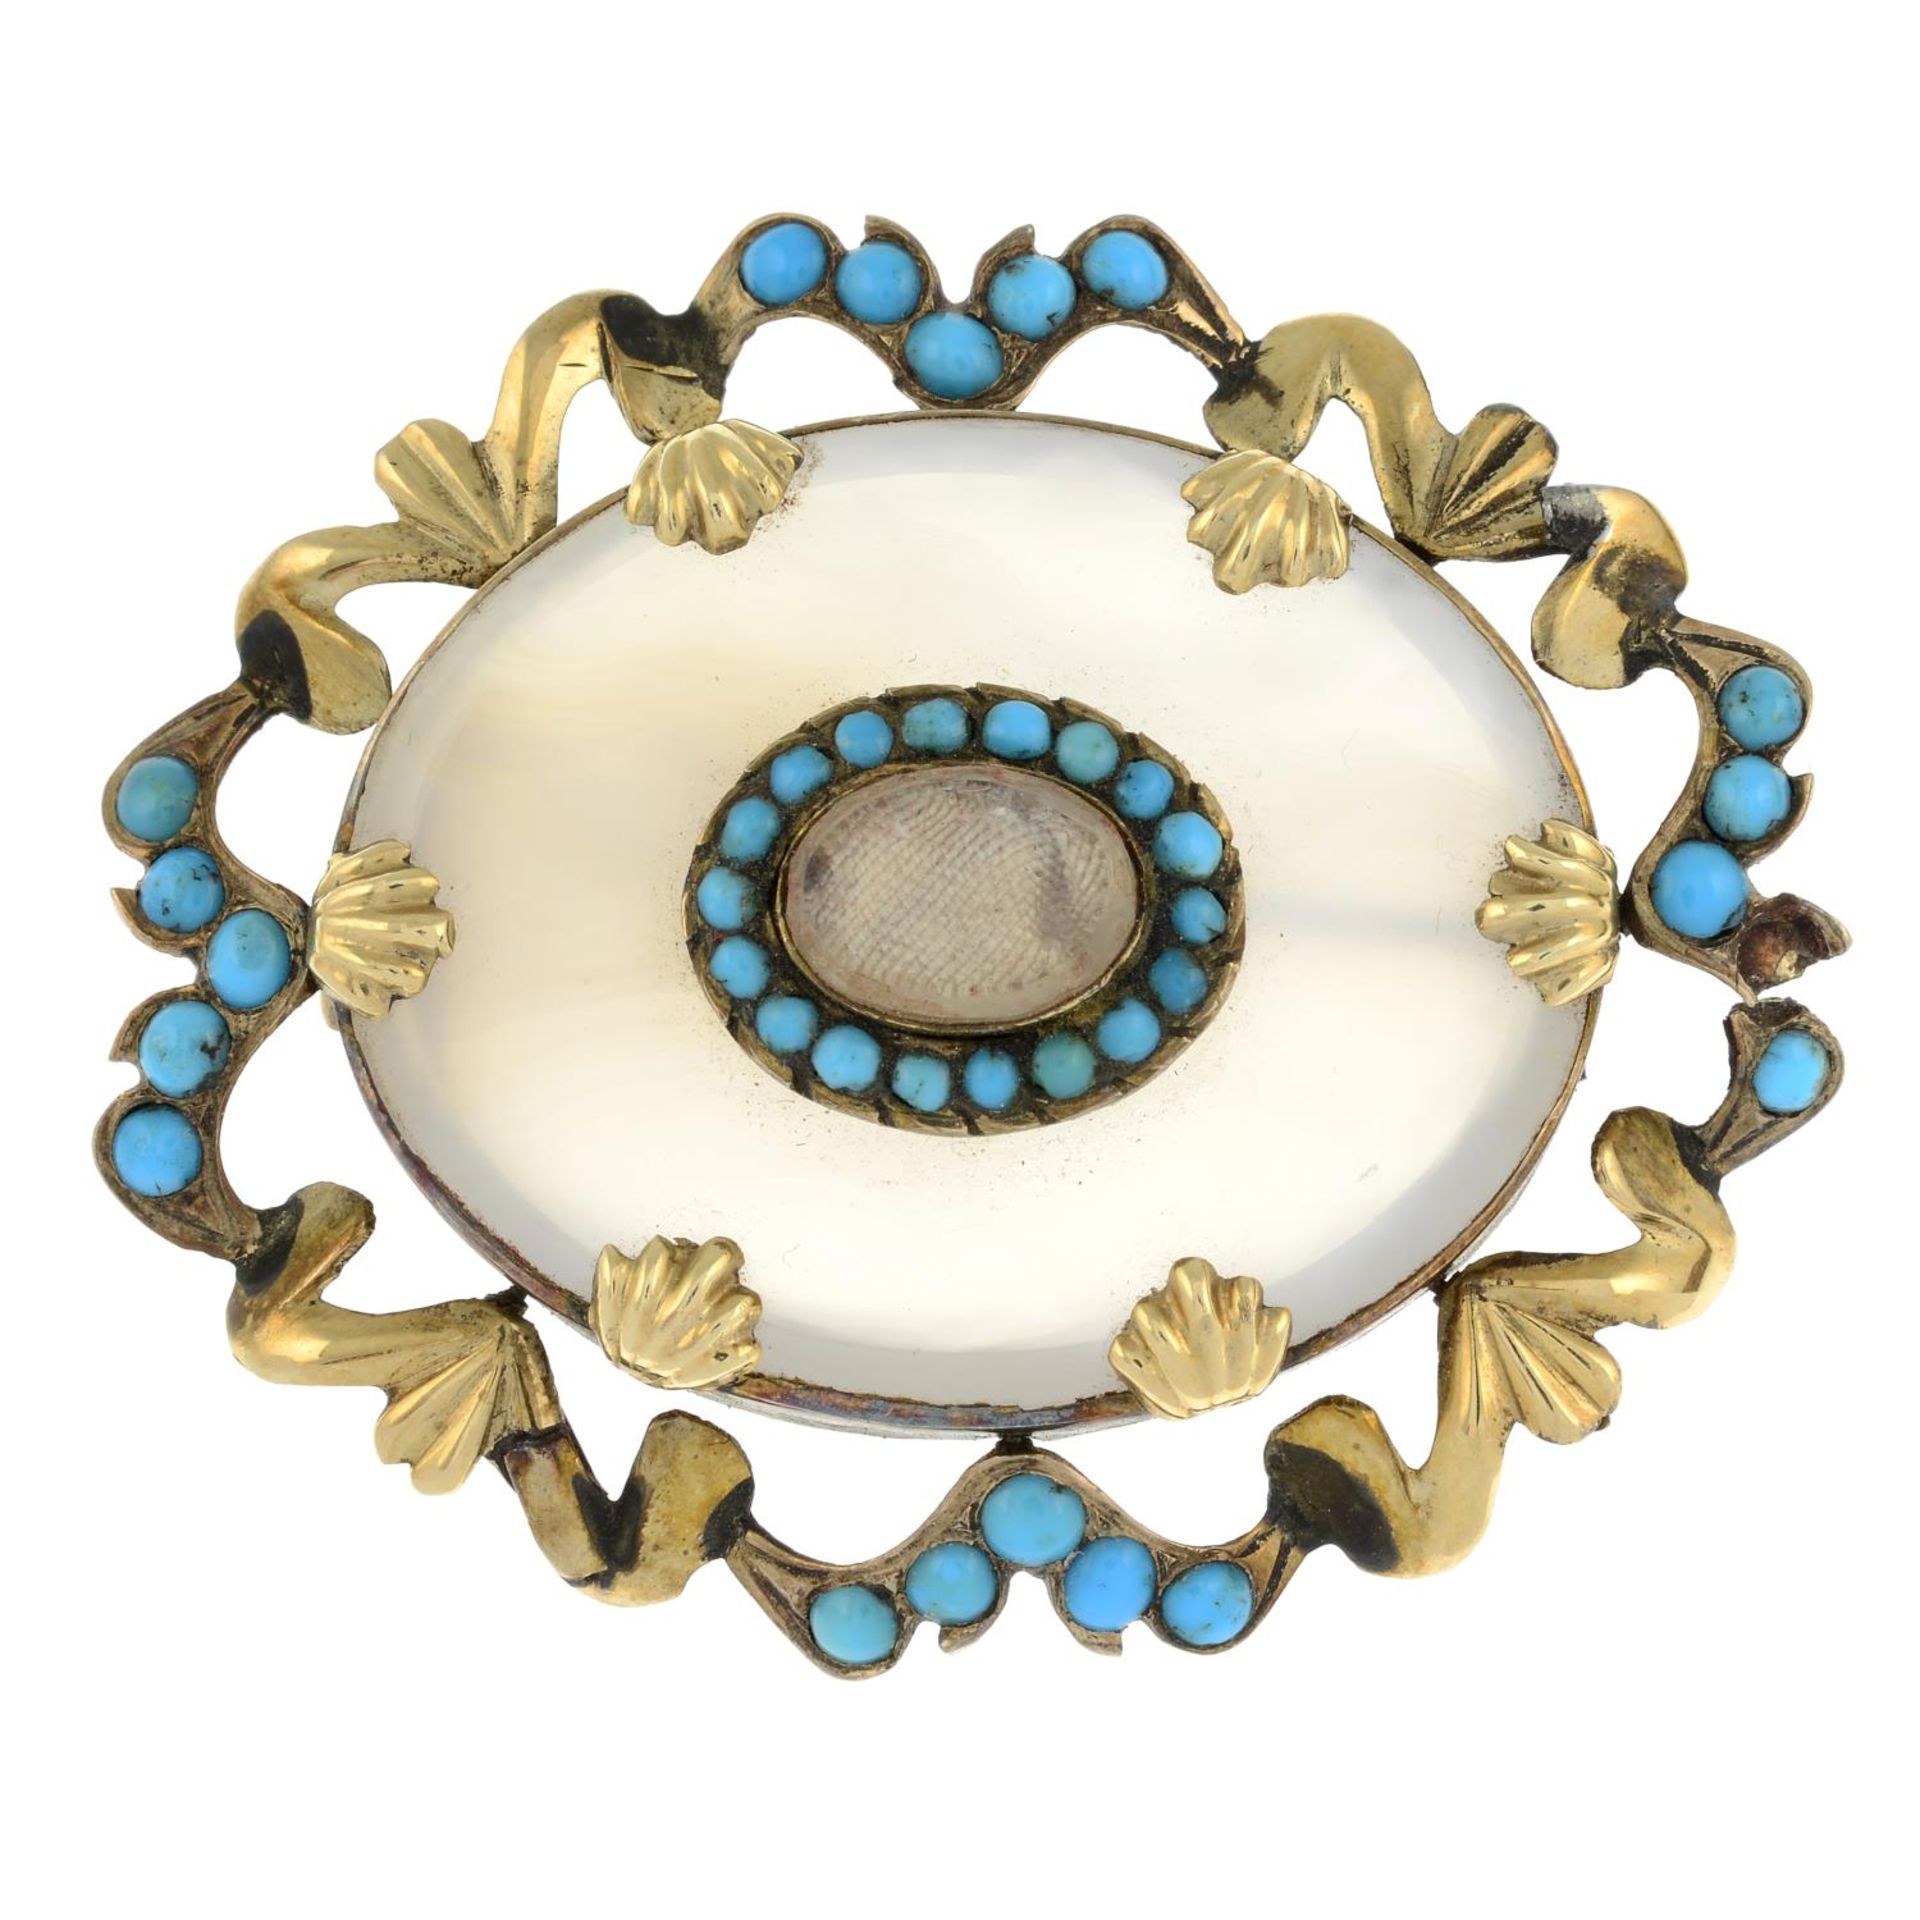 A late 19th century chalcedony and turquoise mourning brooch.